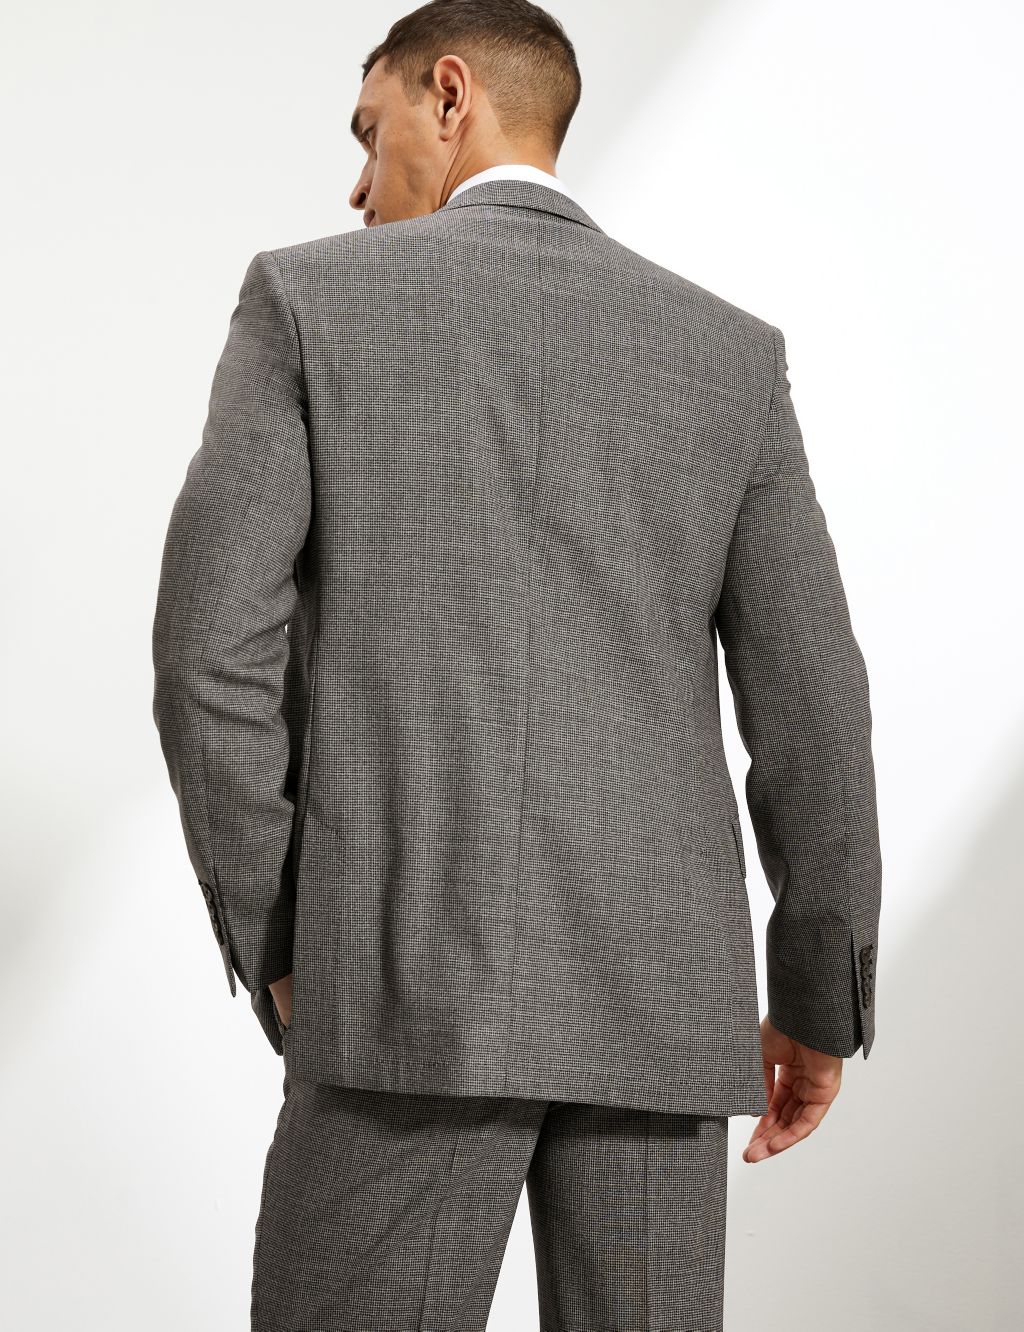 Tailored Fit Bi-Stretch Puppytooth Suit image 3